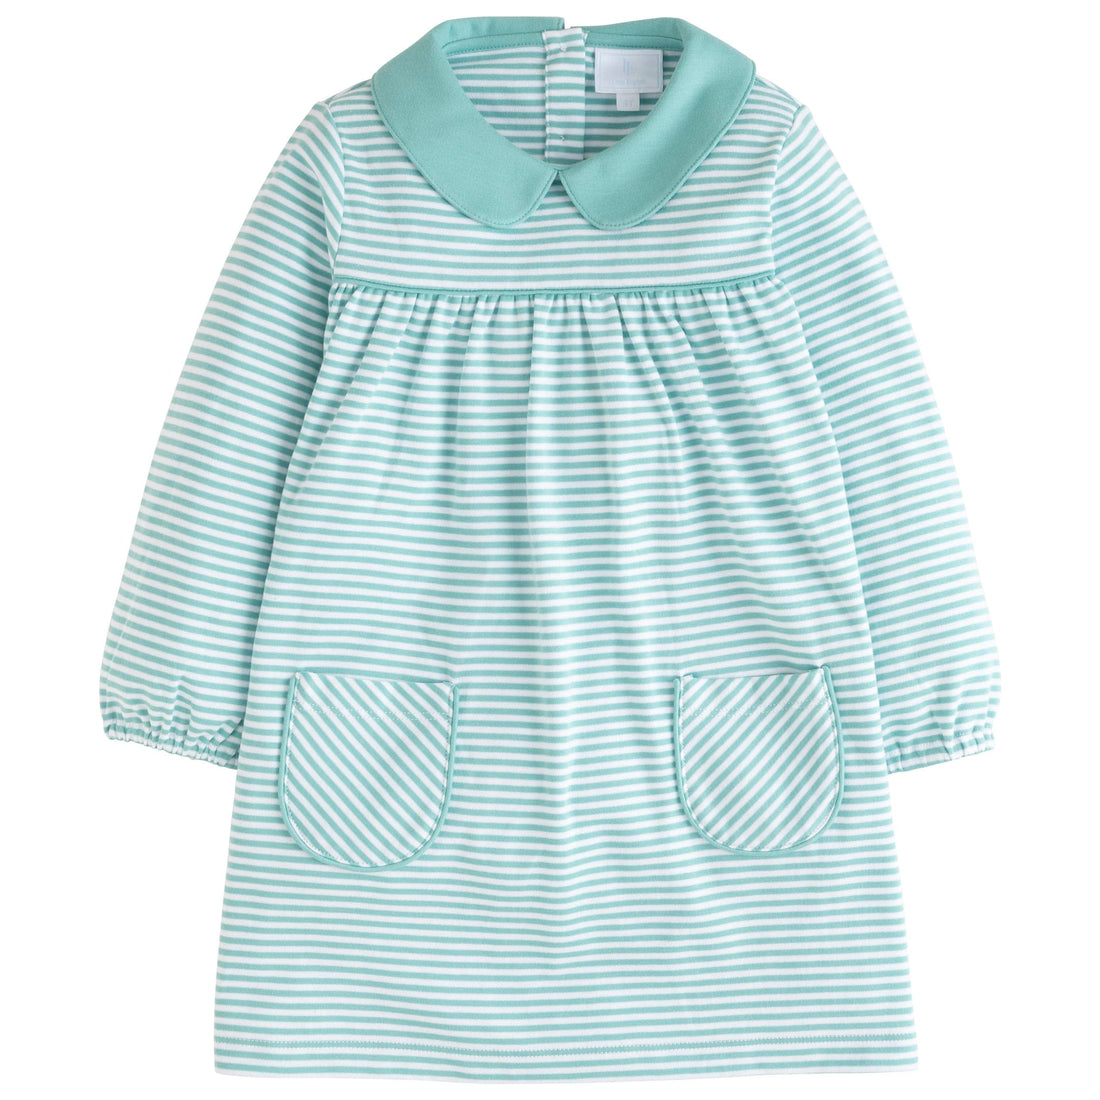 little english classic childrens clothing girls blue/green and white striped long sleeve dress with front pockets and peter pan collar